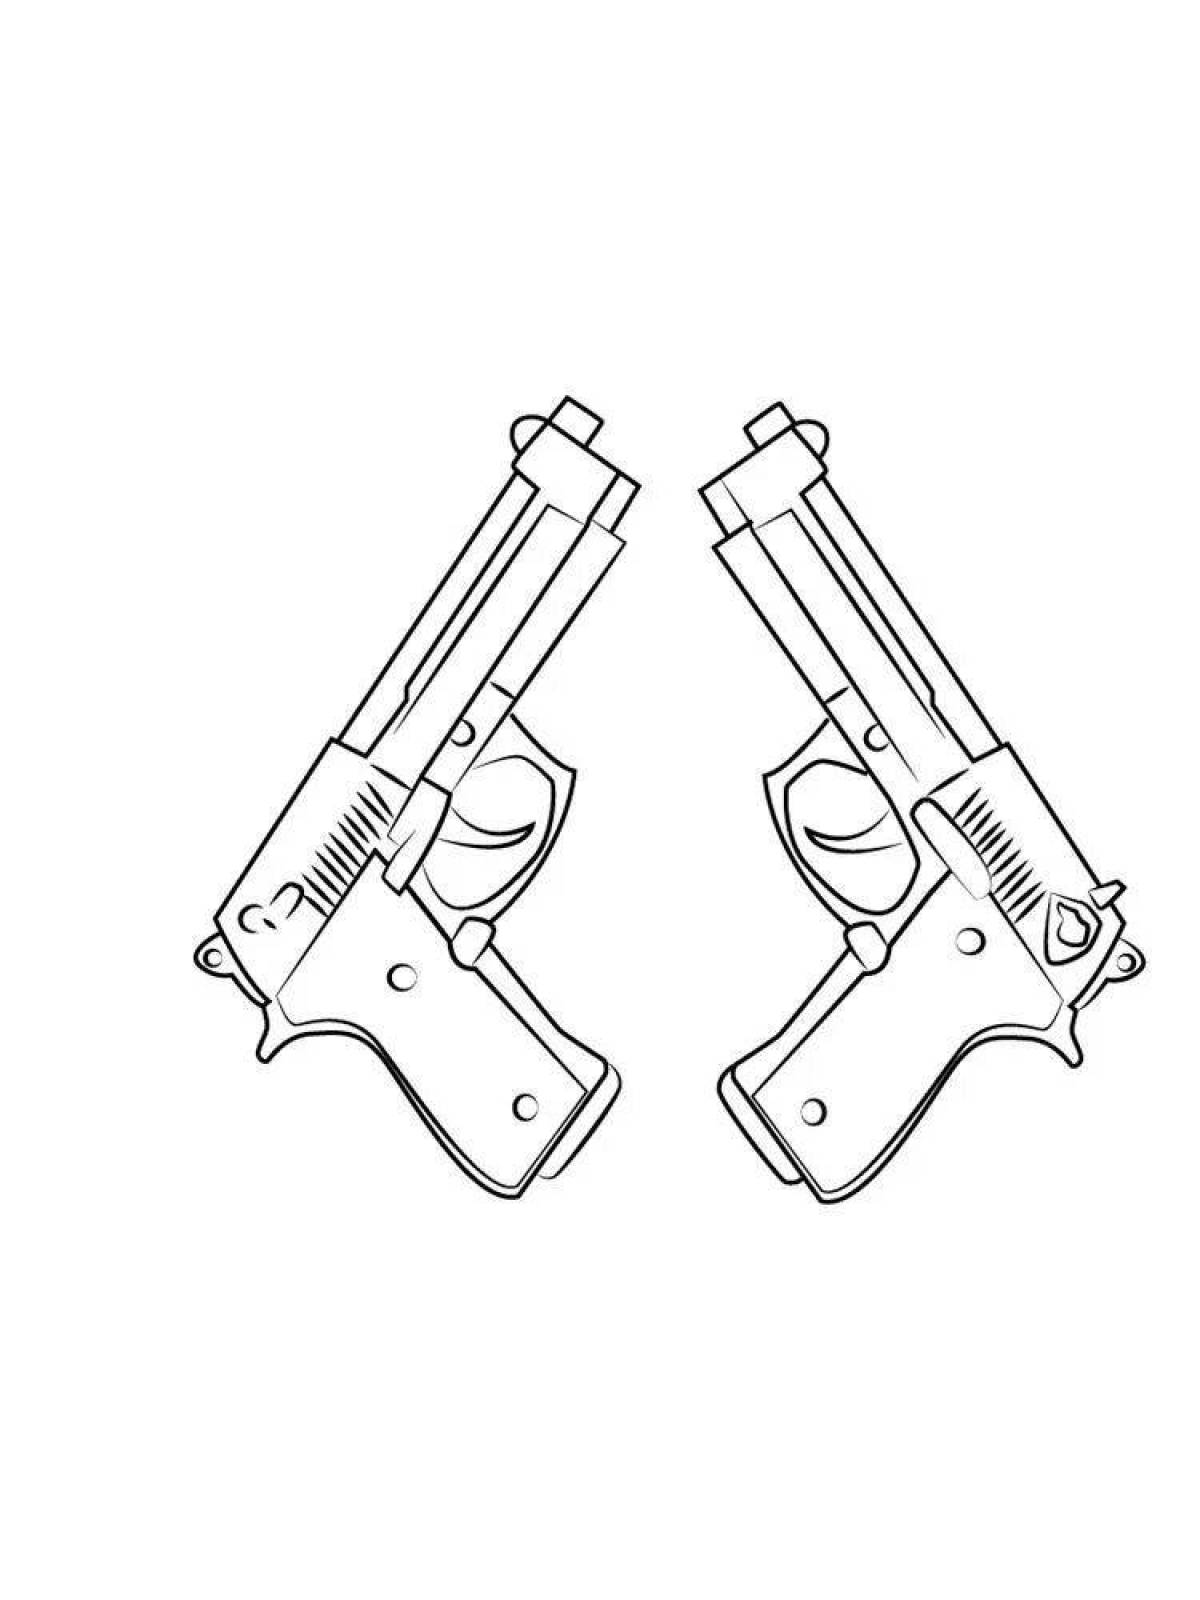 Fun coloring pages with two weapons